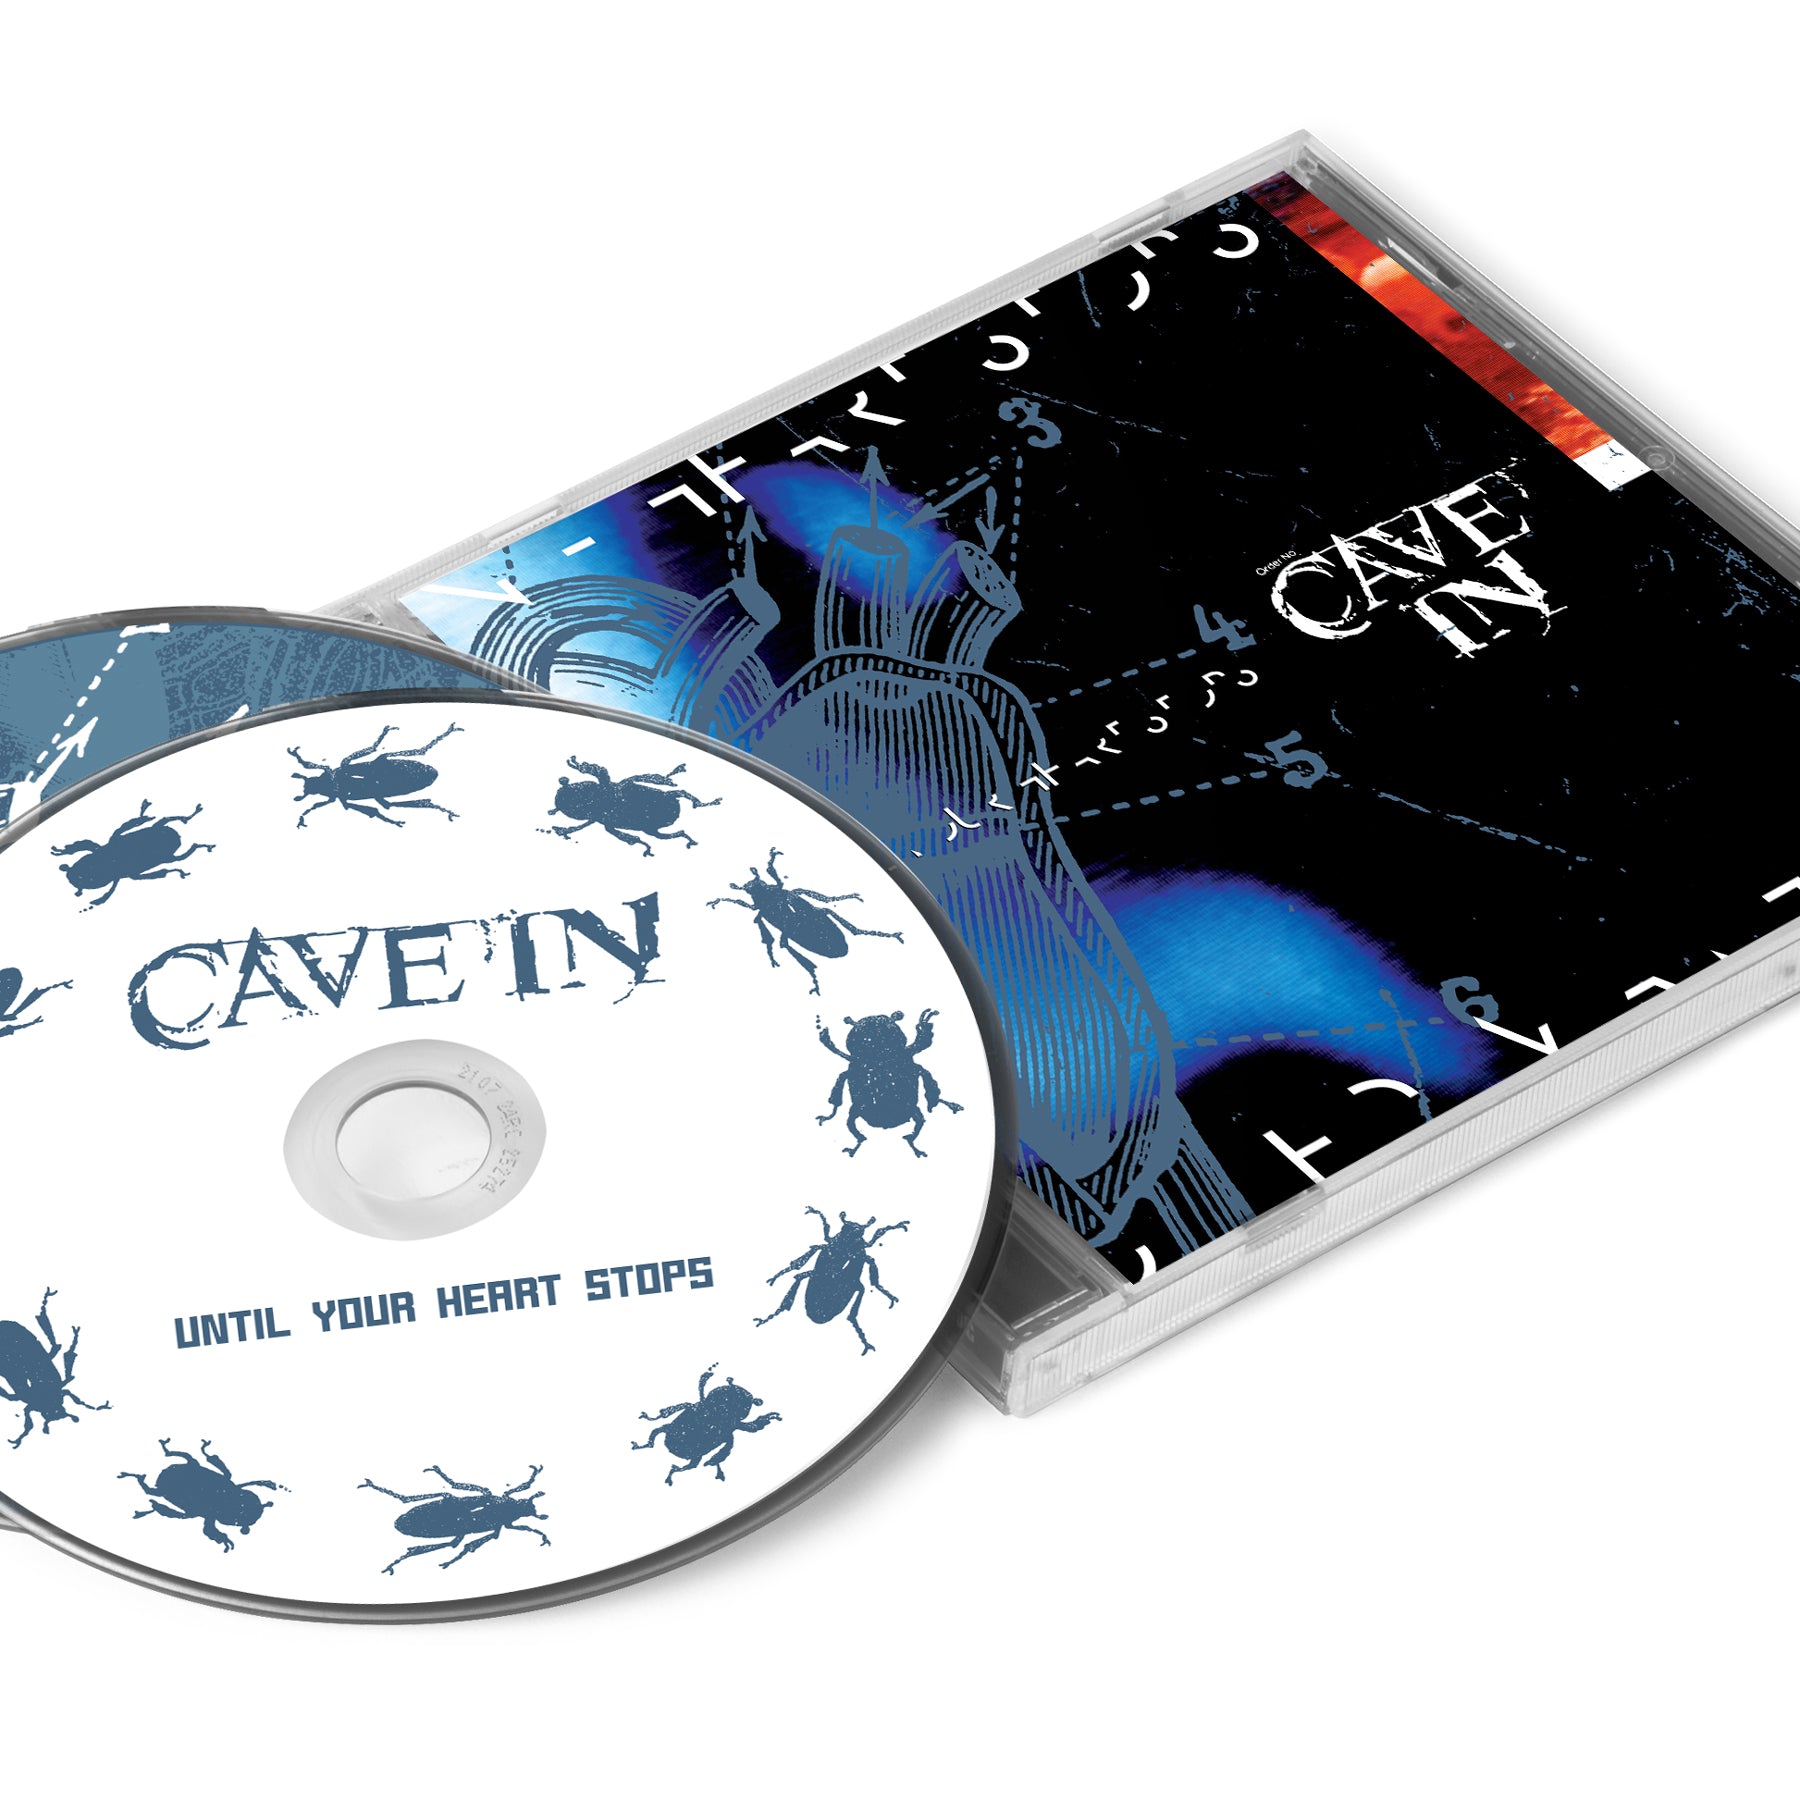 Cave In "Until Your Heart Stops (Reissue)" 2xCD